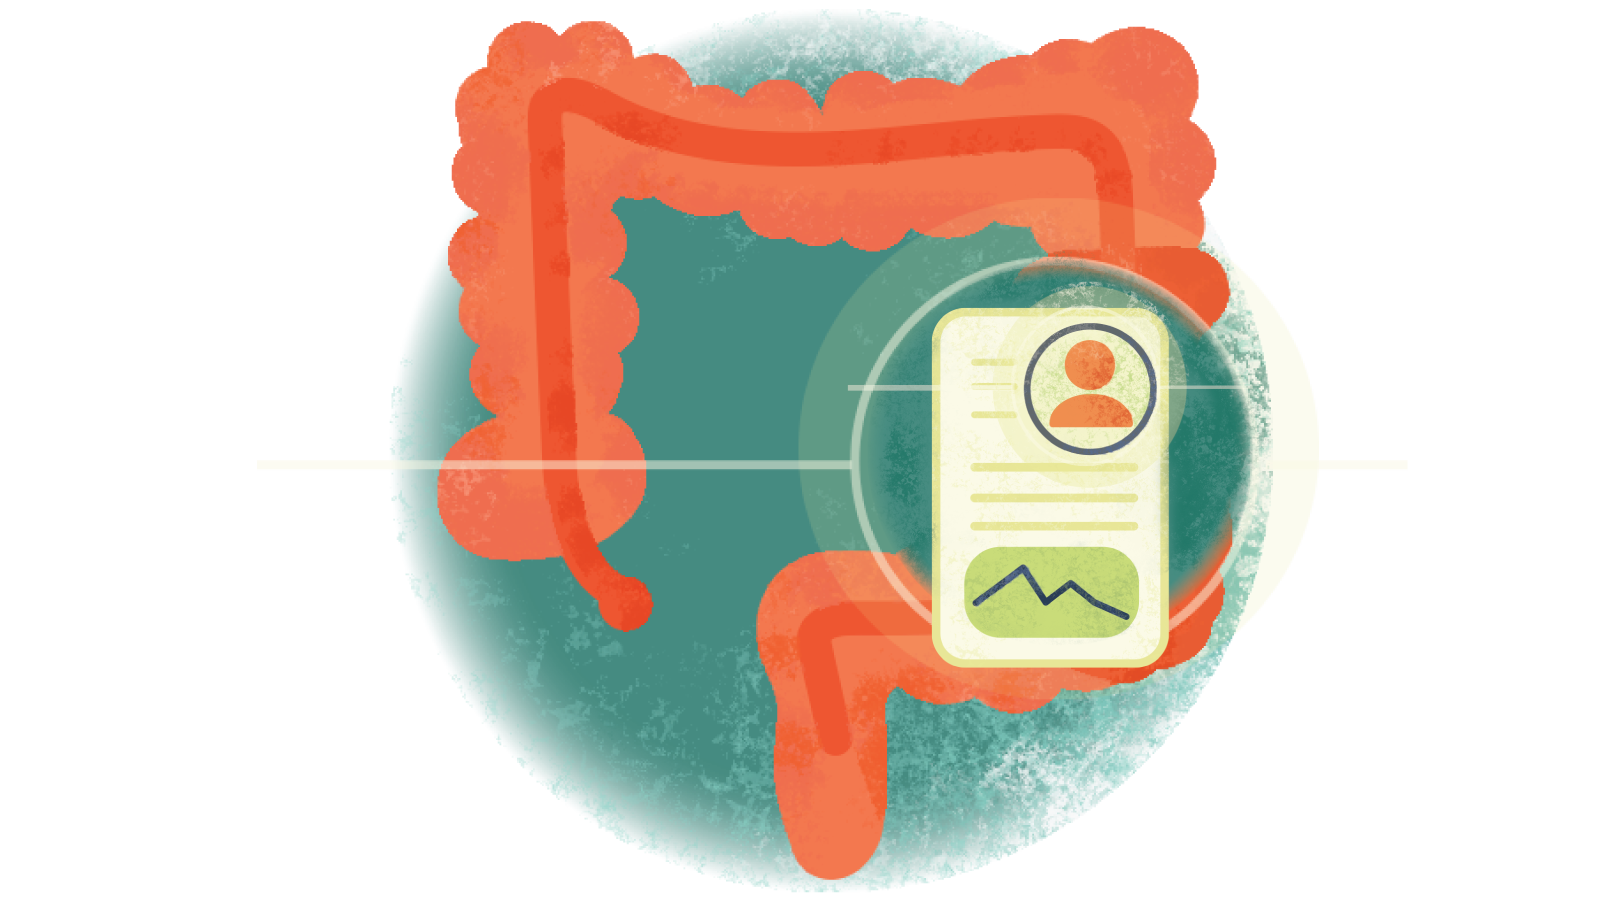 Illustration of written case study over a colon with ulcerative colitis 